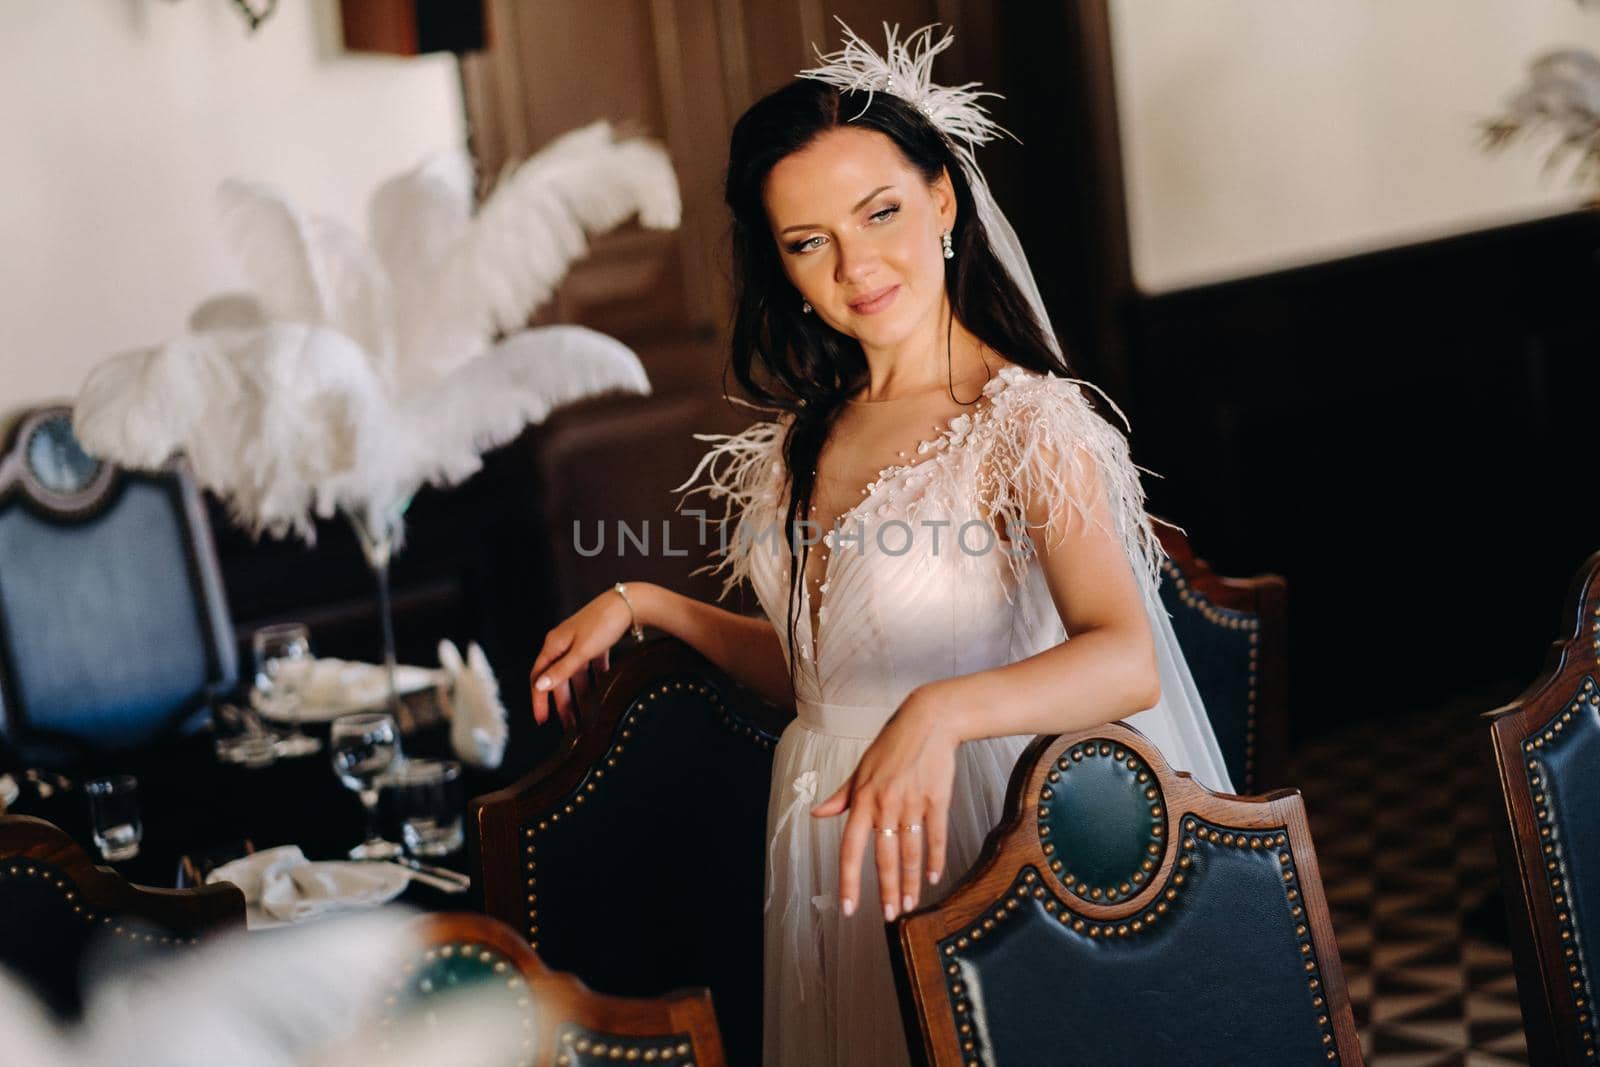 A stylish bride in a wedding dress in the interior of a restaurant decorated with feathers on the tables.